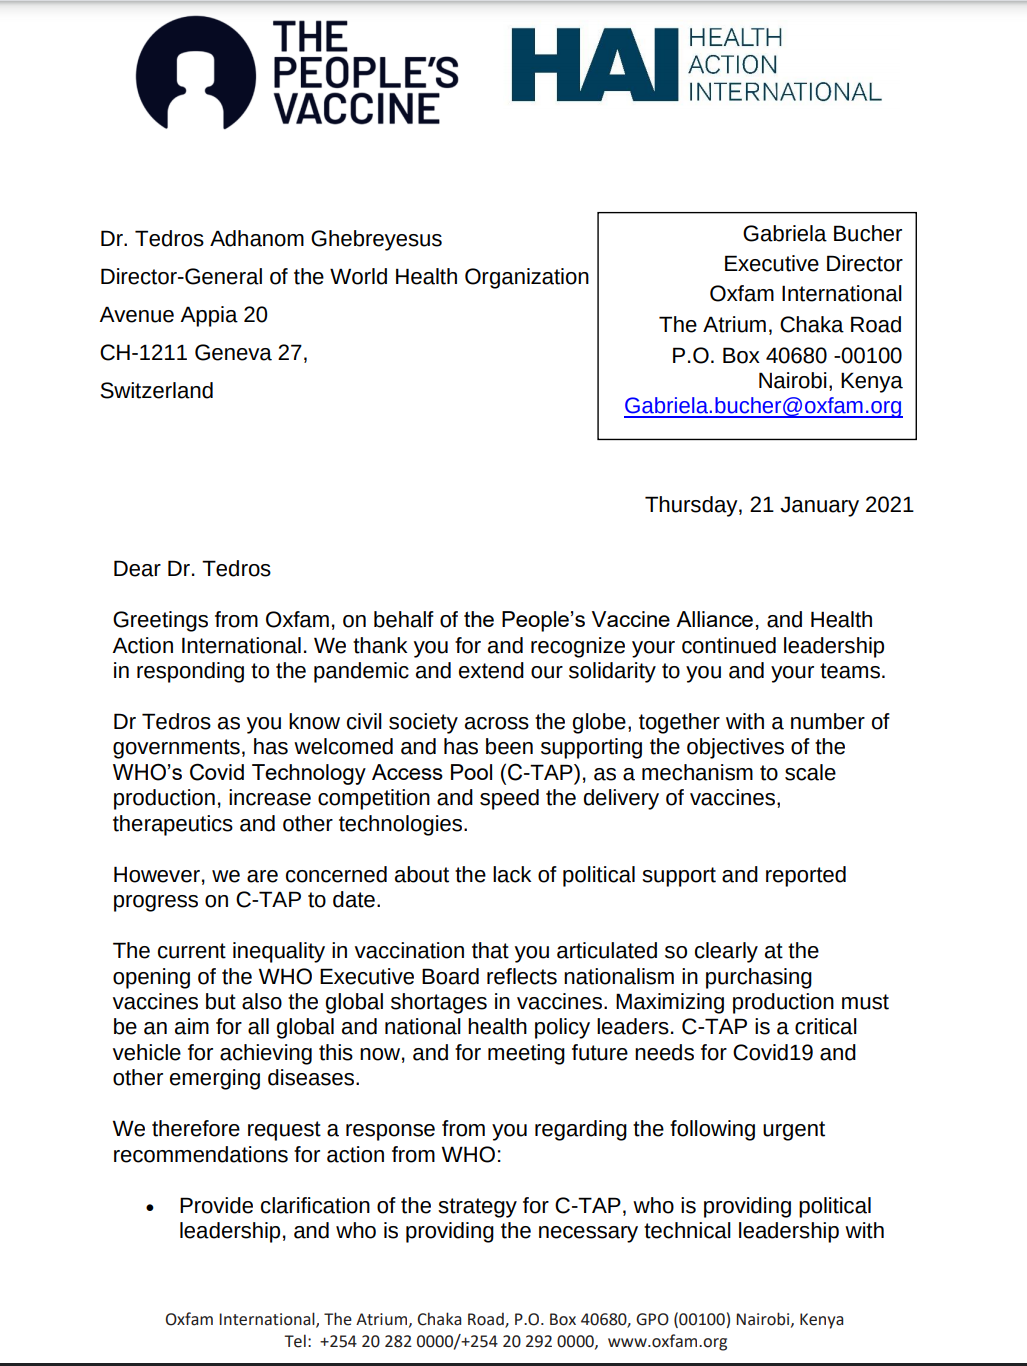 Letter From The People S Vaccine Alliance And Health Action International To Dr Tedros On C Tap Knowledge Ecology International